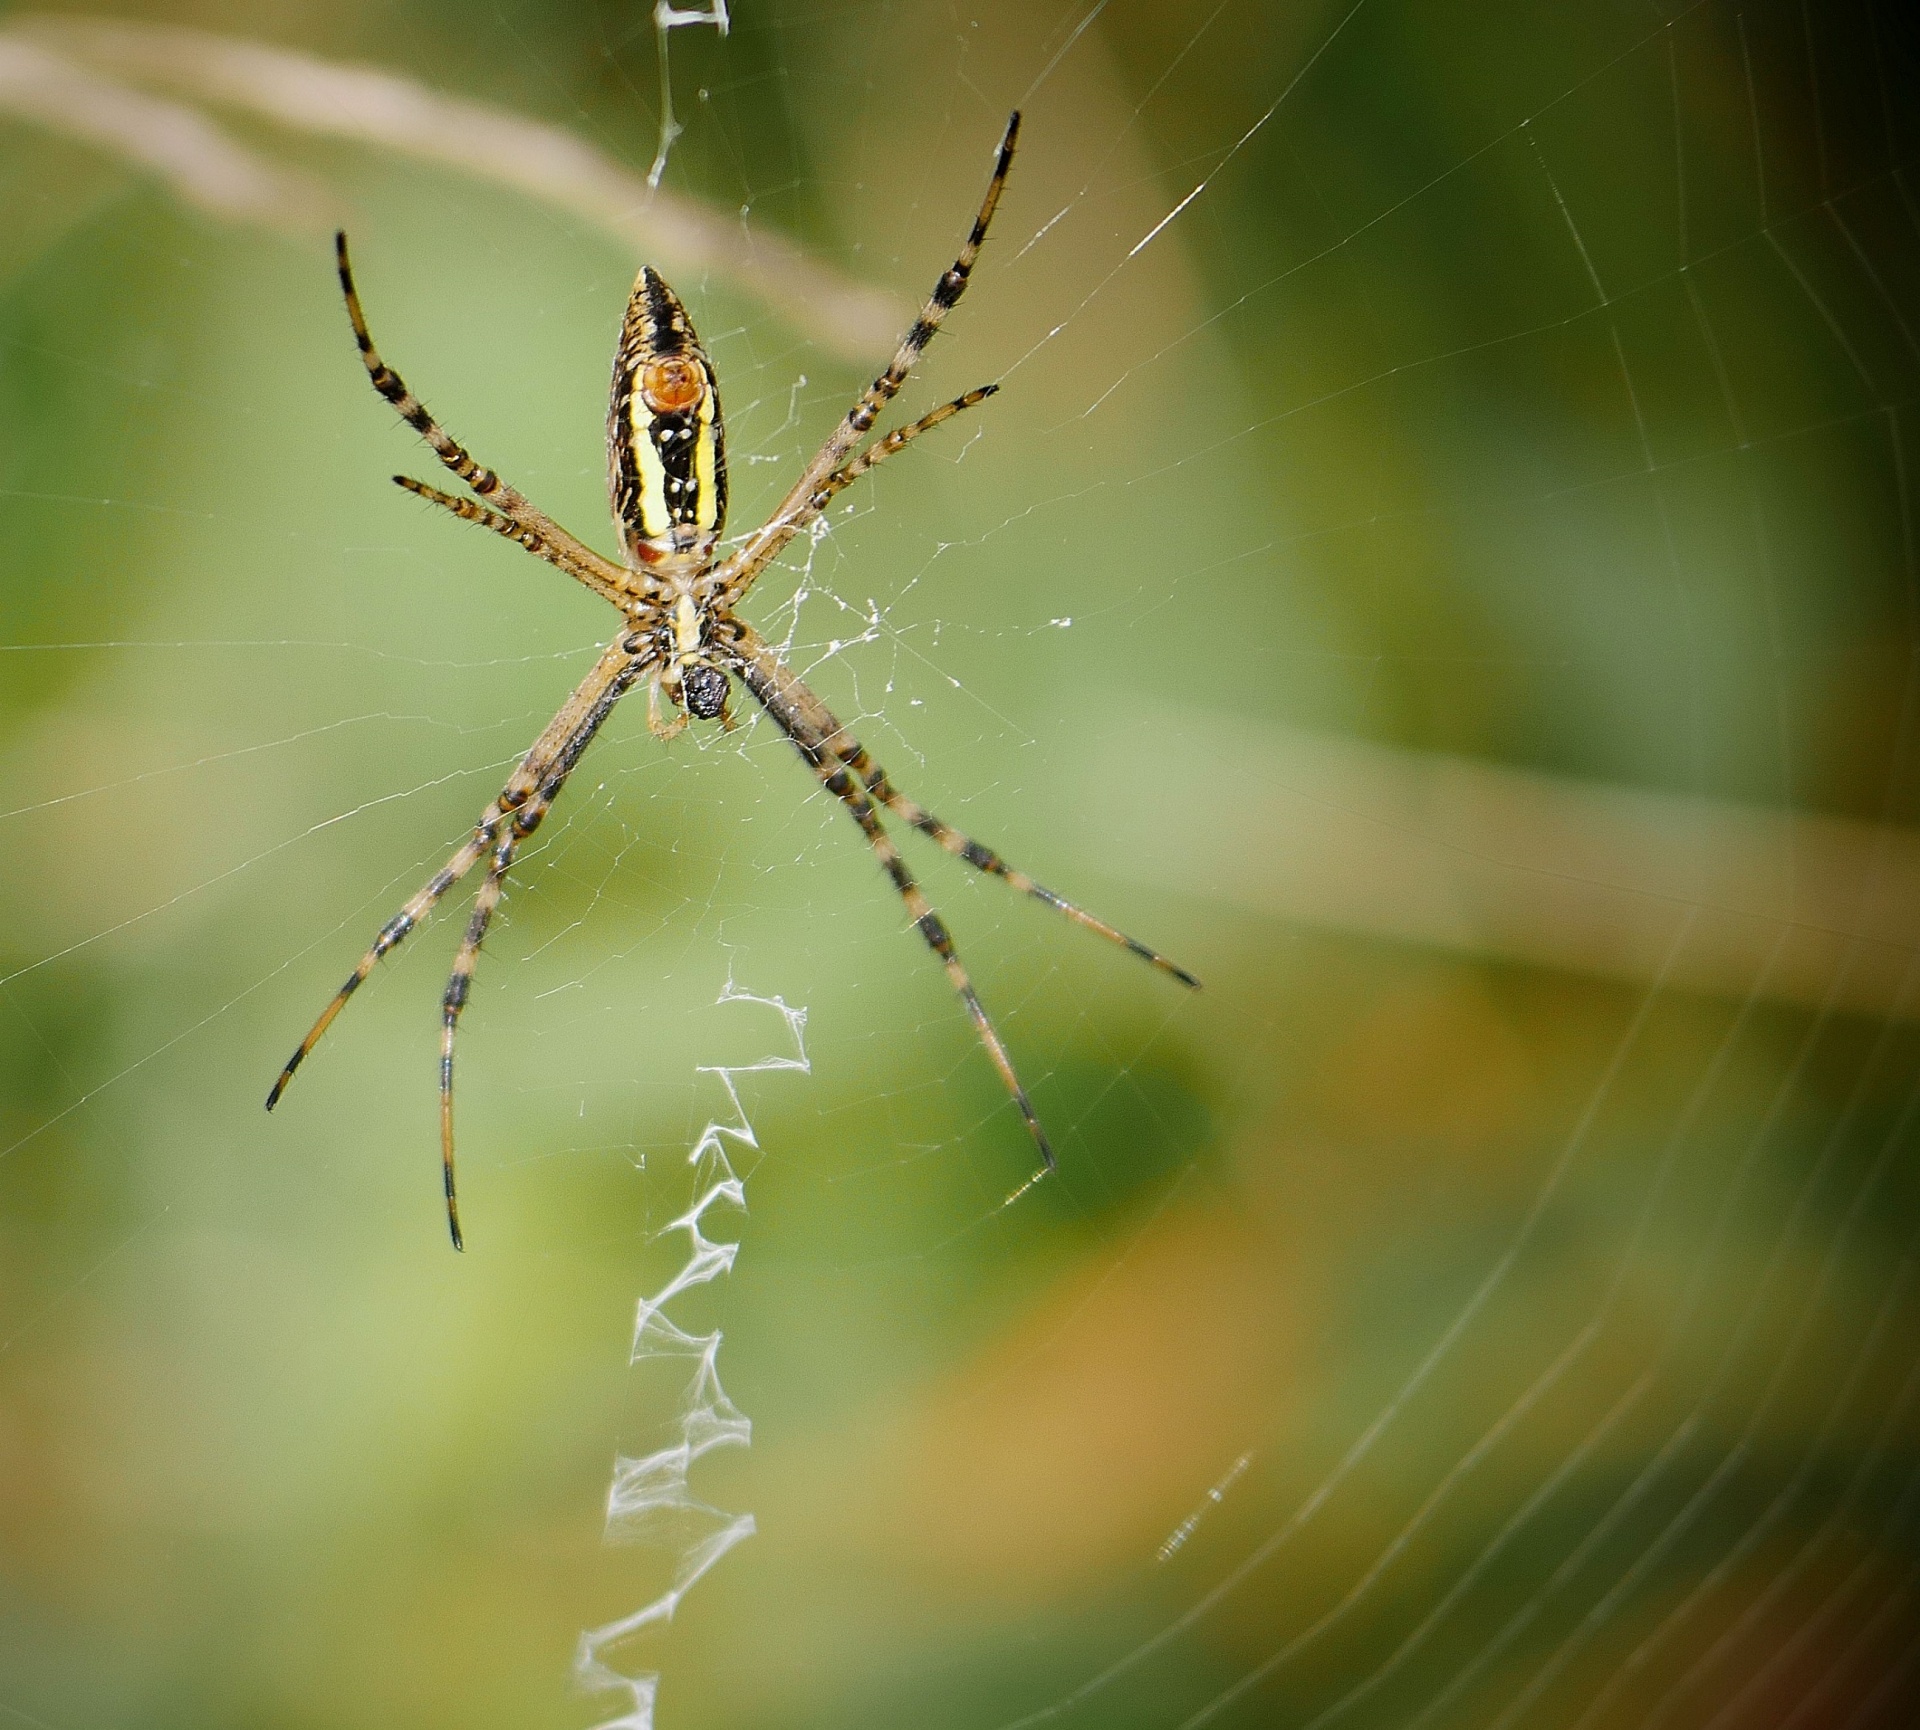 Close Up of a Black and Yellow Garden Spider in a Web